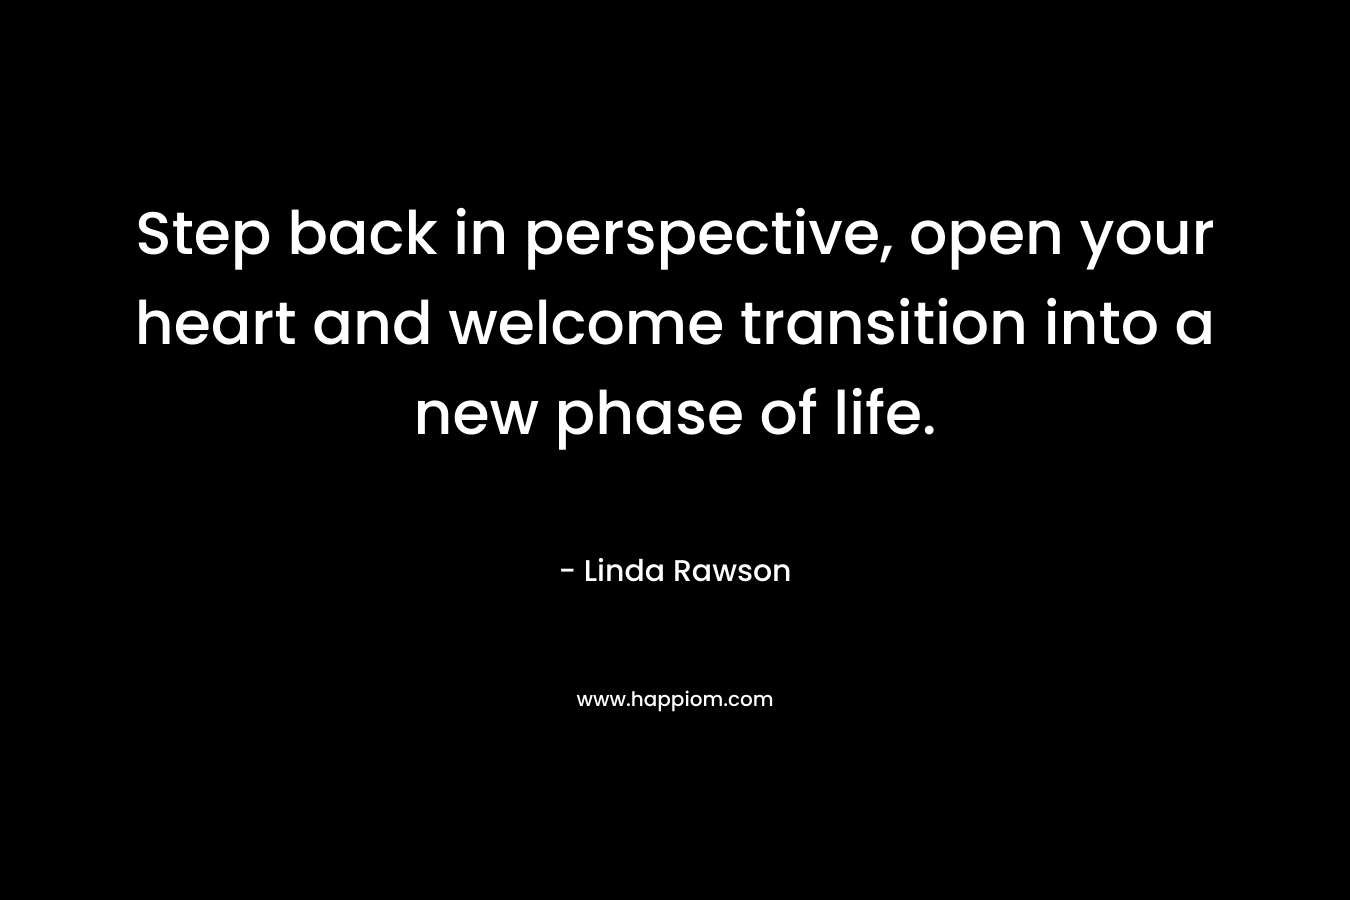 Step back in perspective, open your heart and welcome transition into a new phase of life.